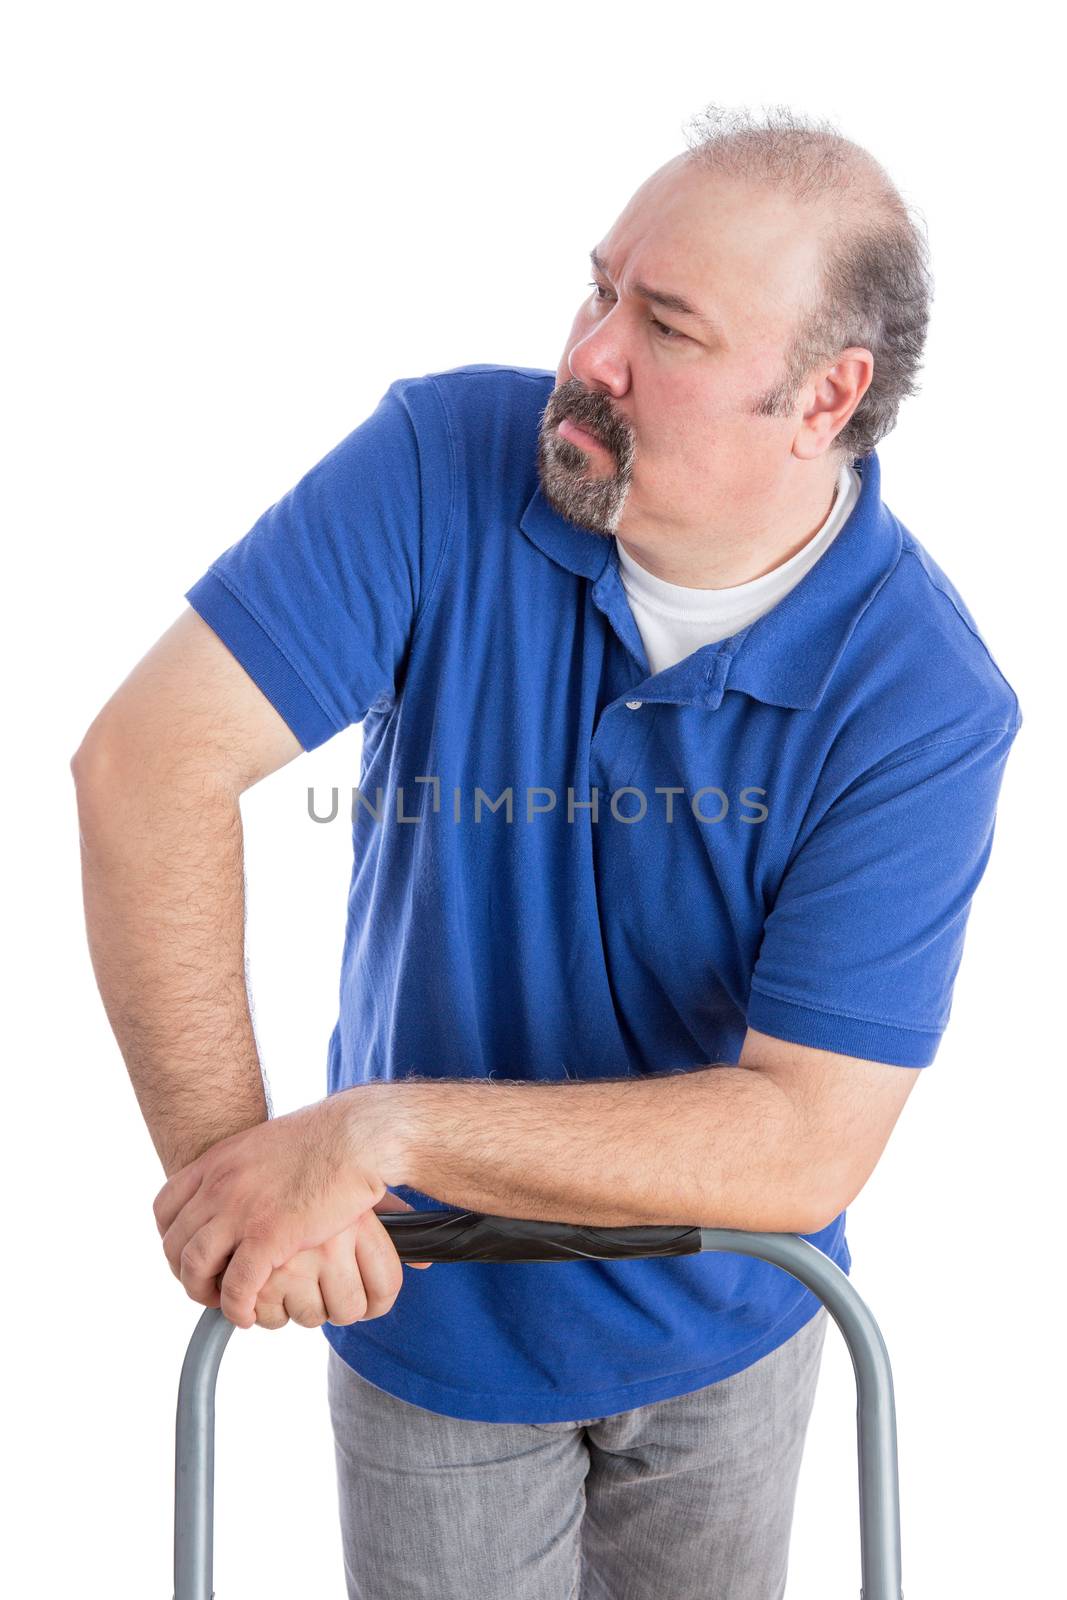 Serious Adult Man in Blue Shirt Leaning Against the Chair While Looking to the Left. Isolated on White.